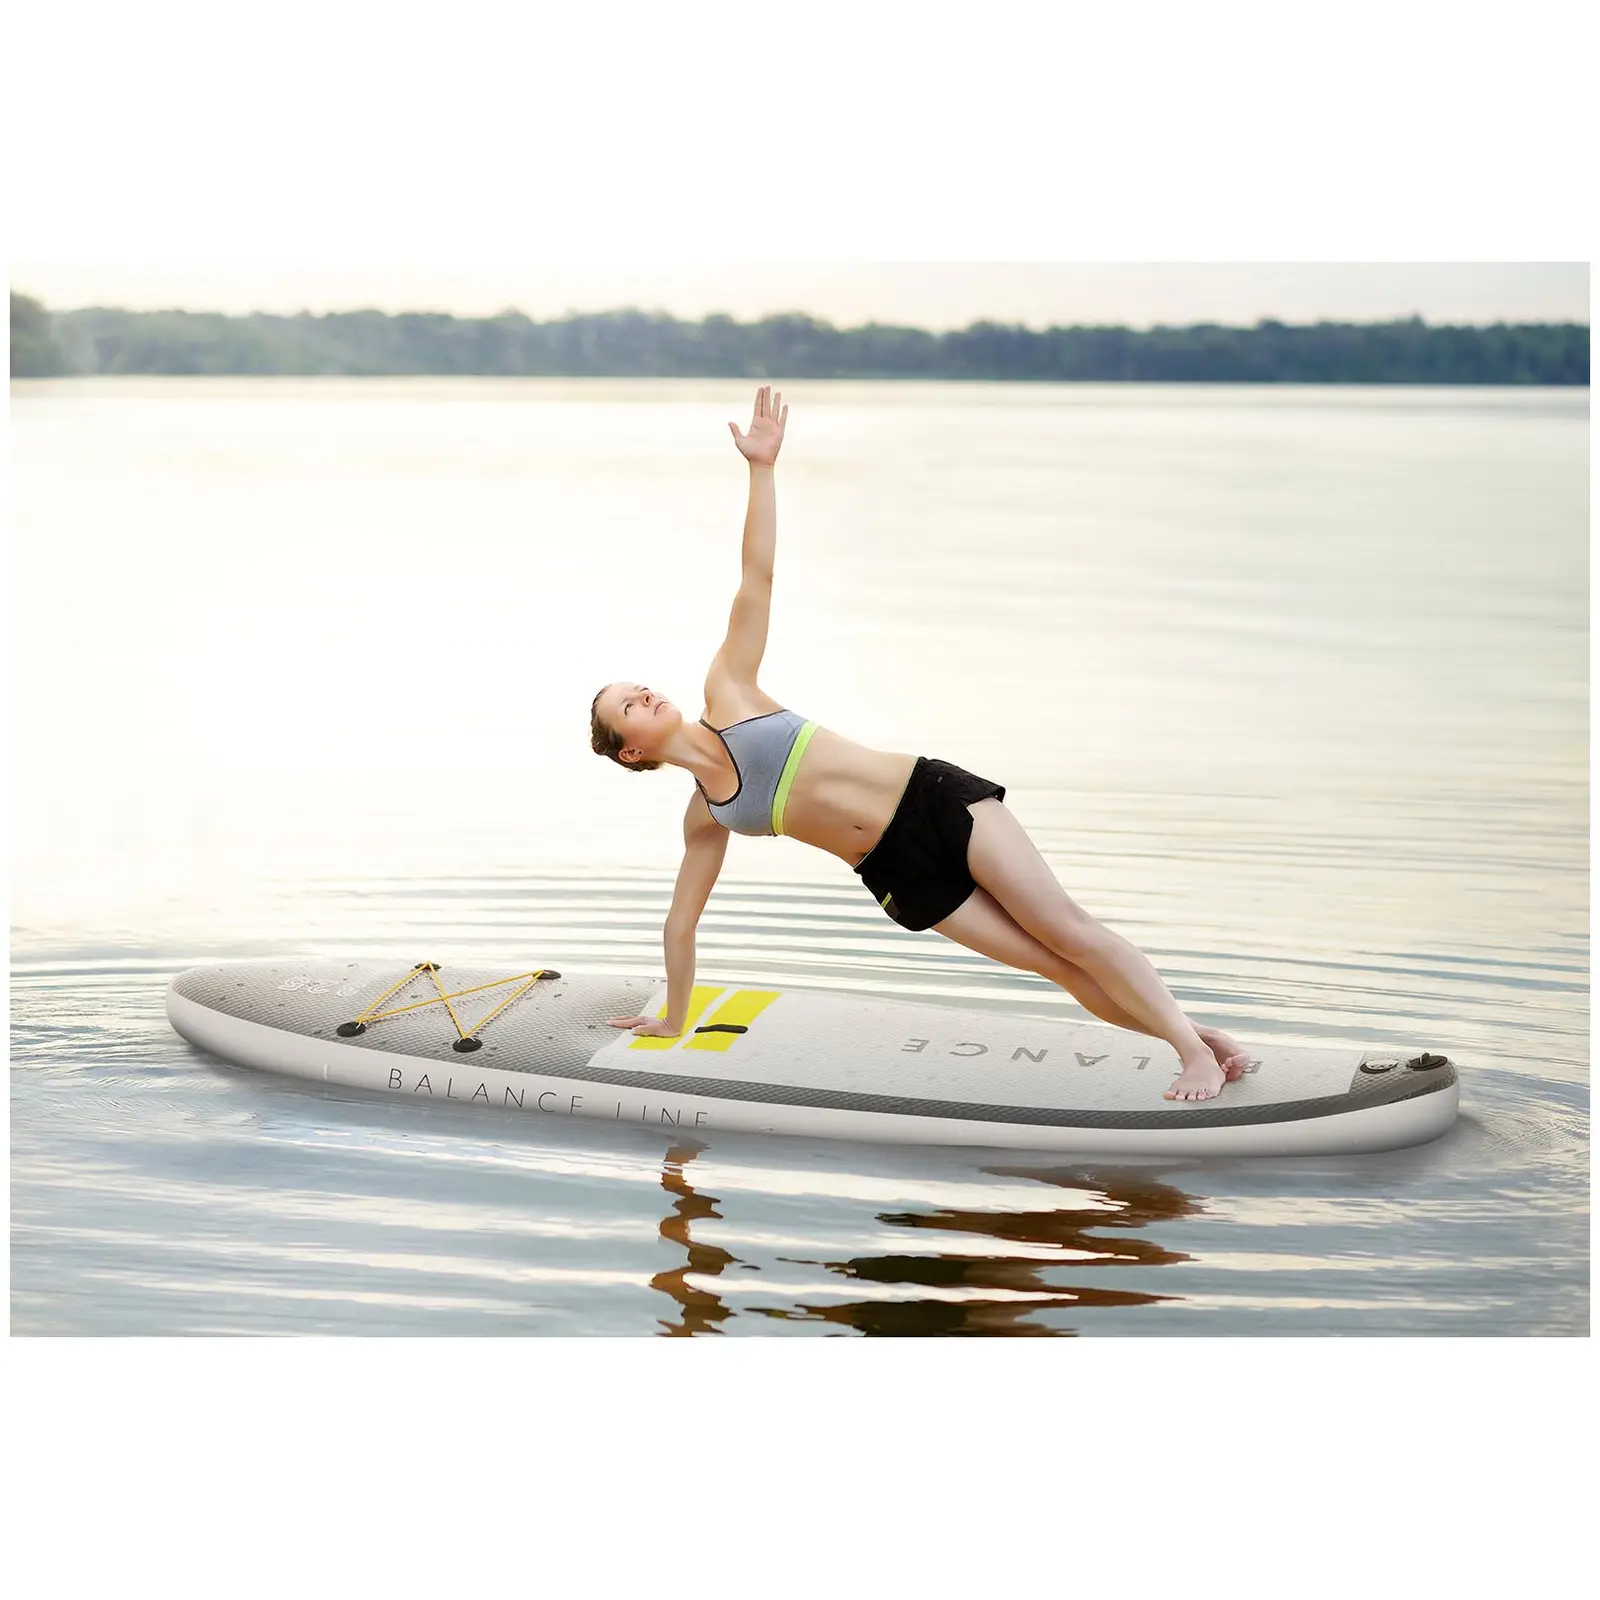 Inflatable SUP Board - 145 kg - black/yellow - set with paddle and accessories